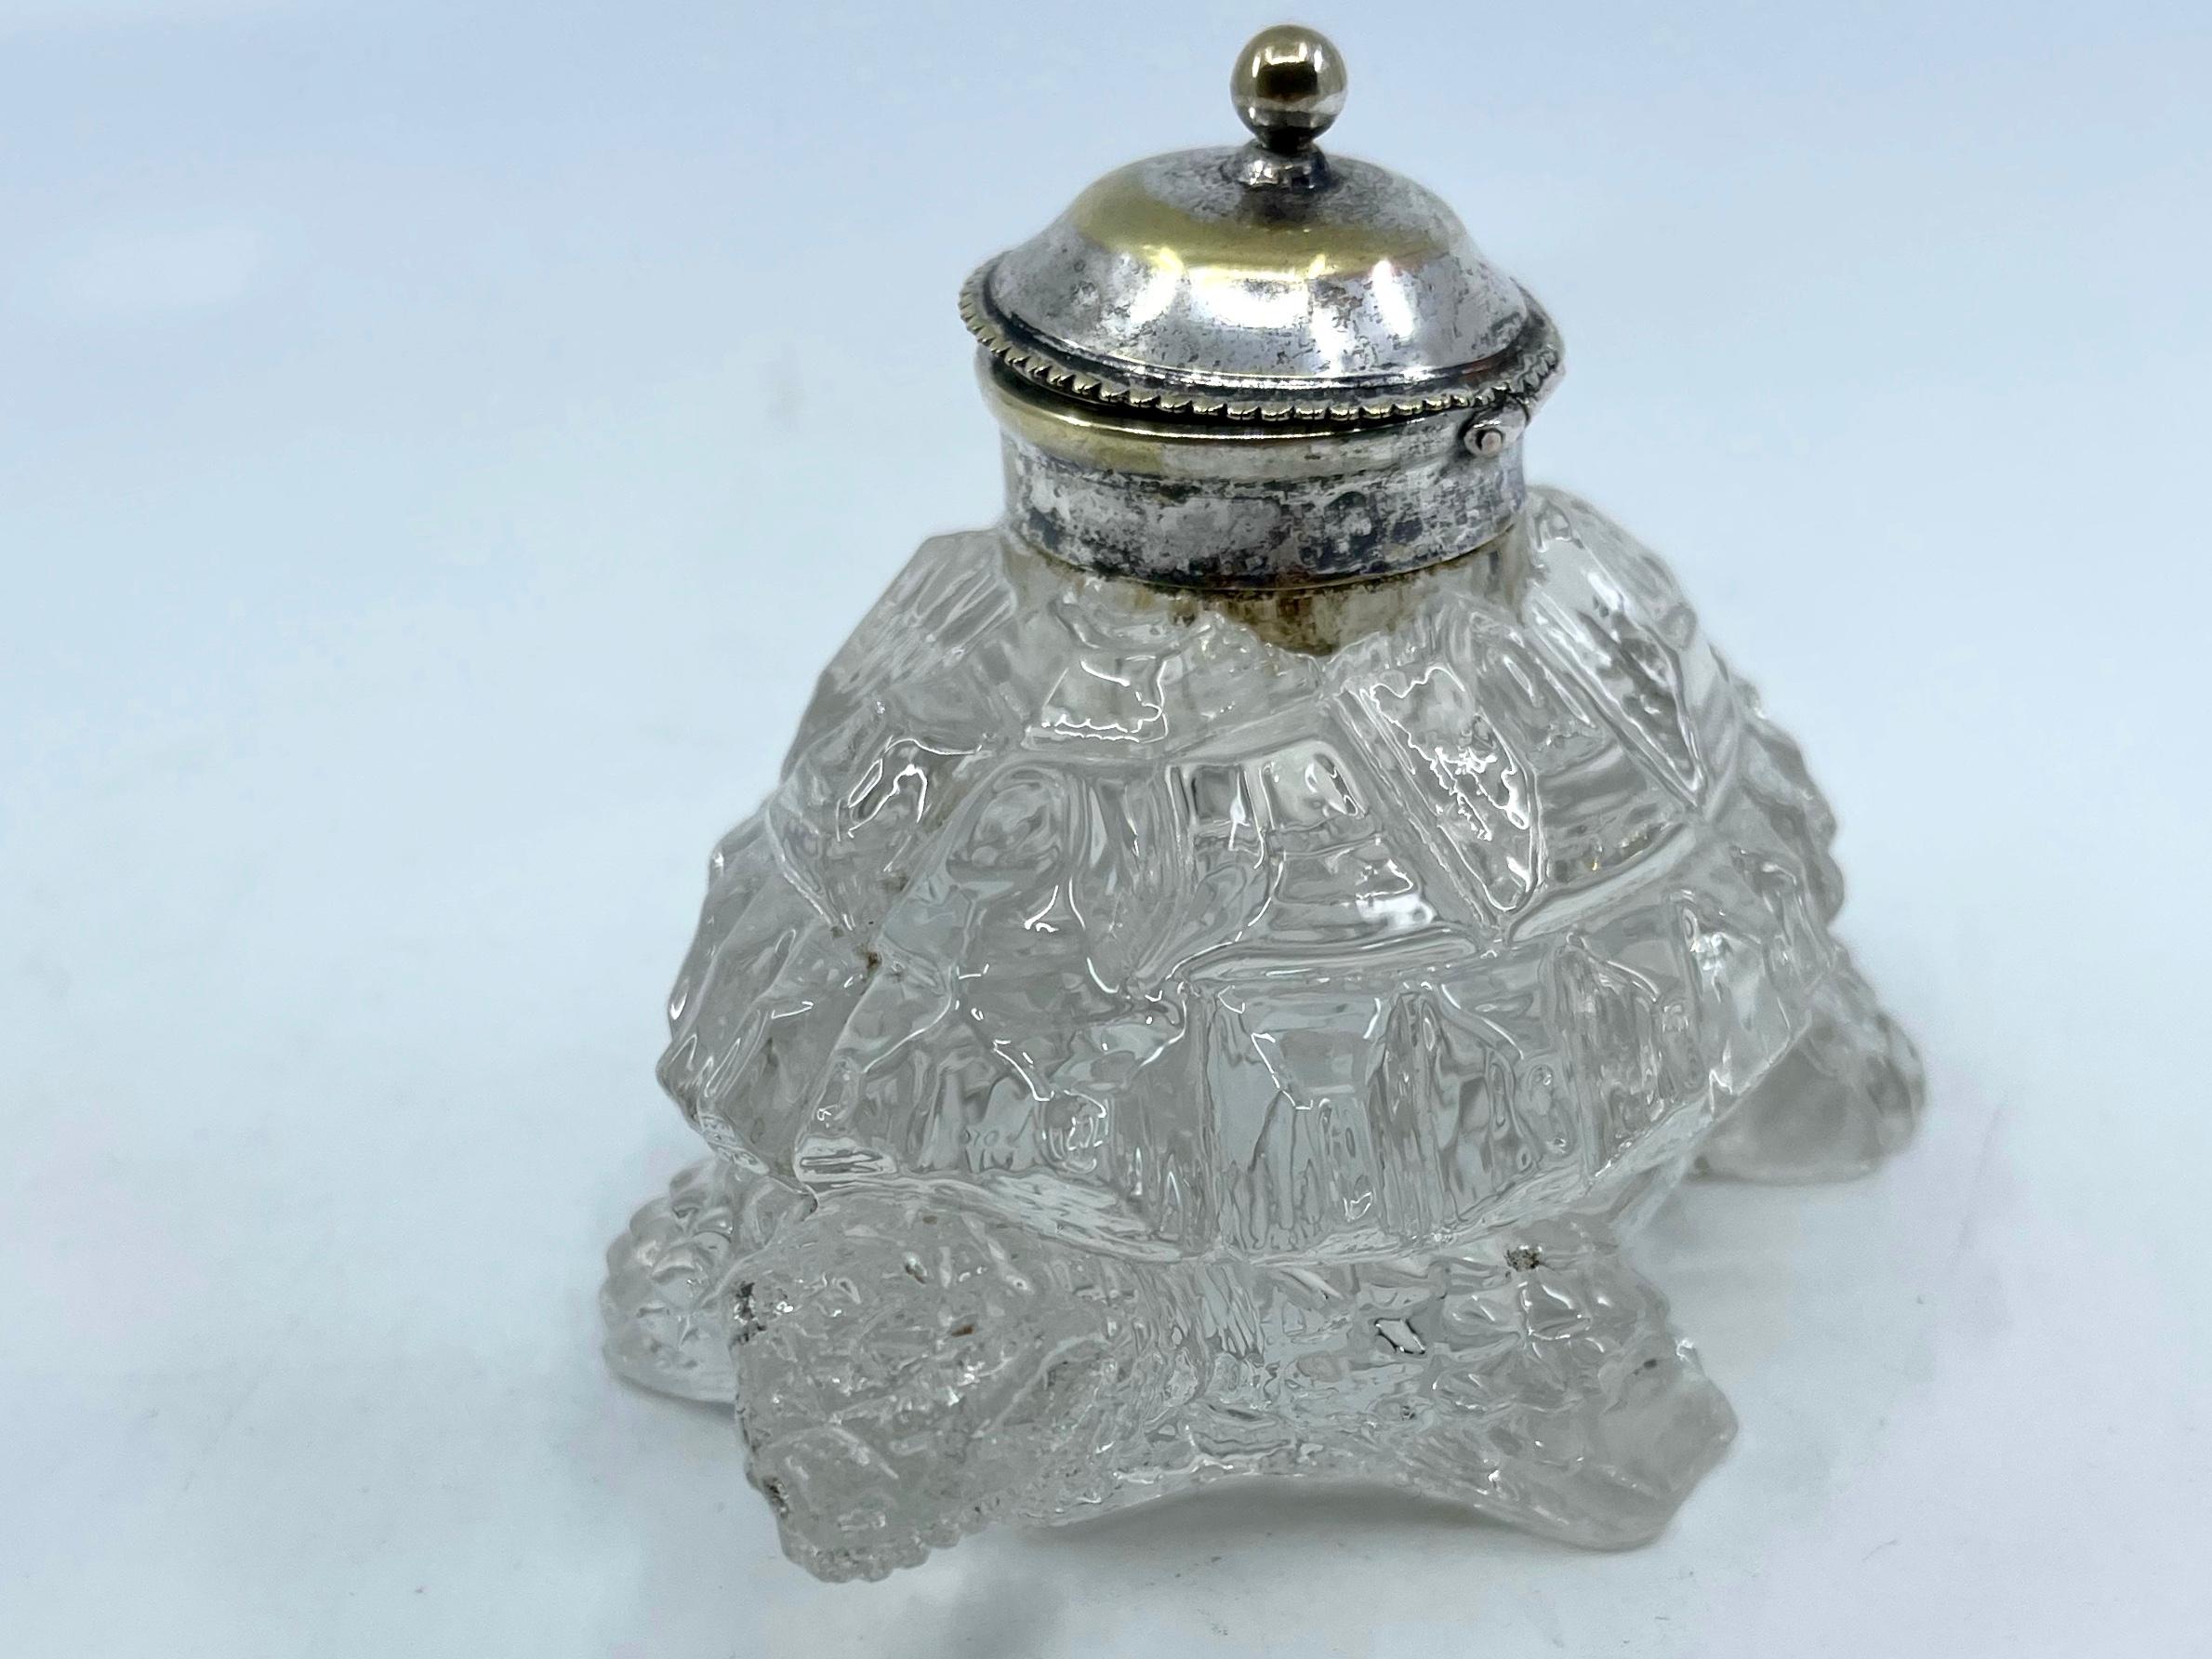 Cut glass tortoise inkwell. Vintage turtle pillbox inkwell of cut glass carrying a mounted finial topped circular lidded well originally for ink but charming as a unique bedside tabletop pillbox. Some antique and smoothed out losses to two feet.